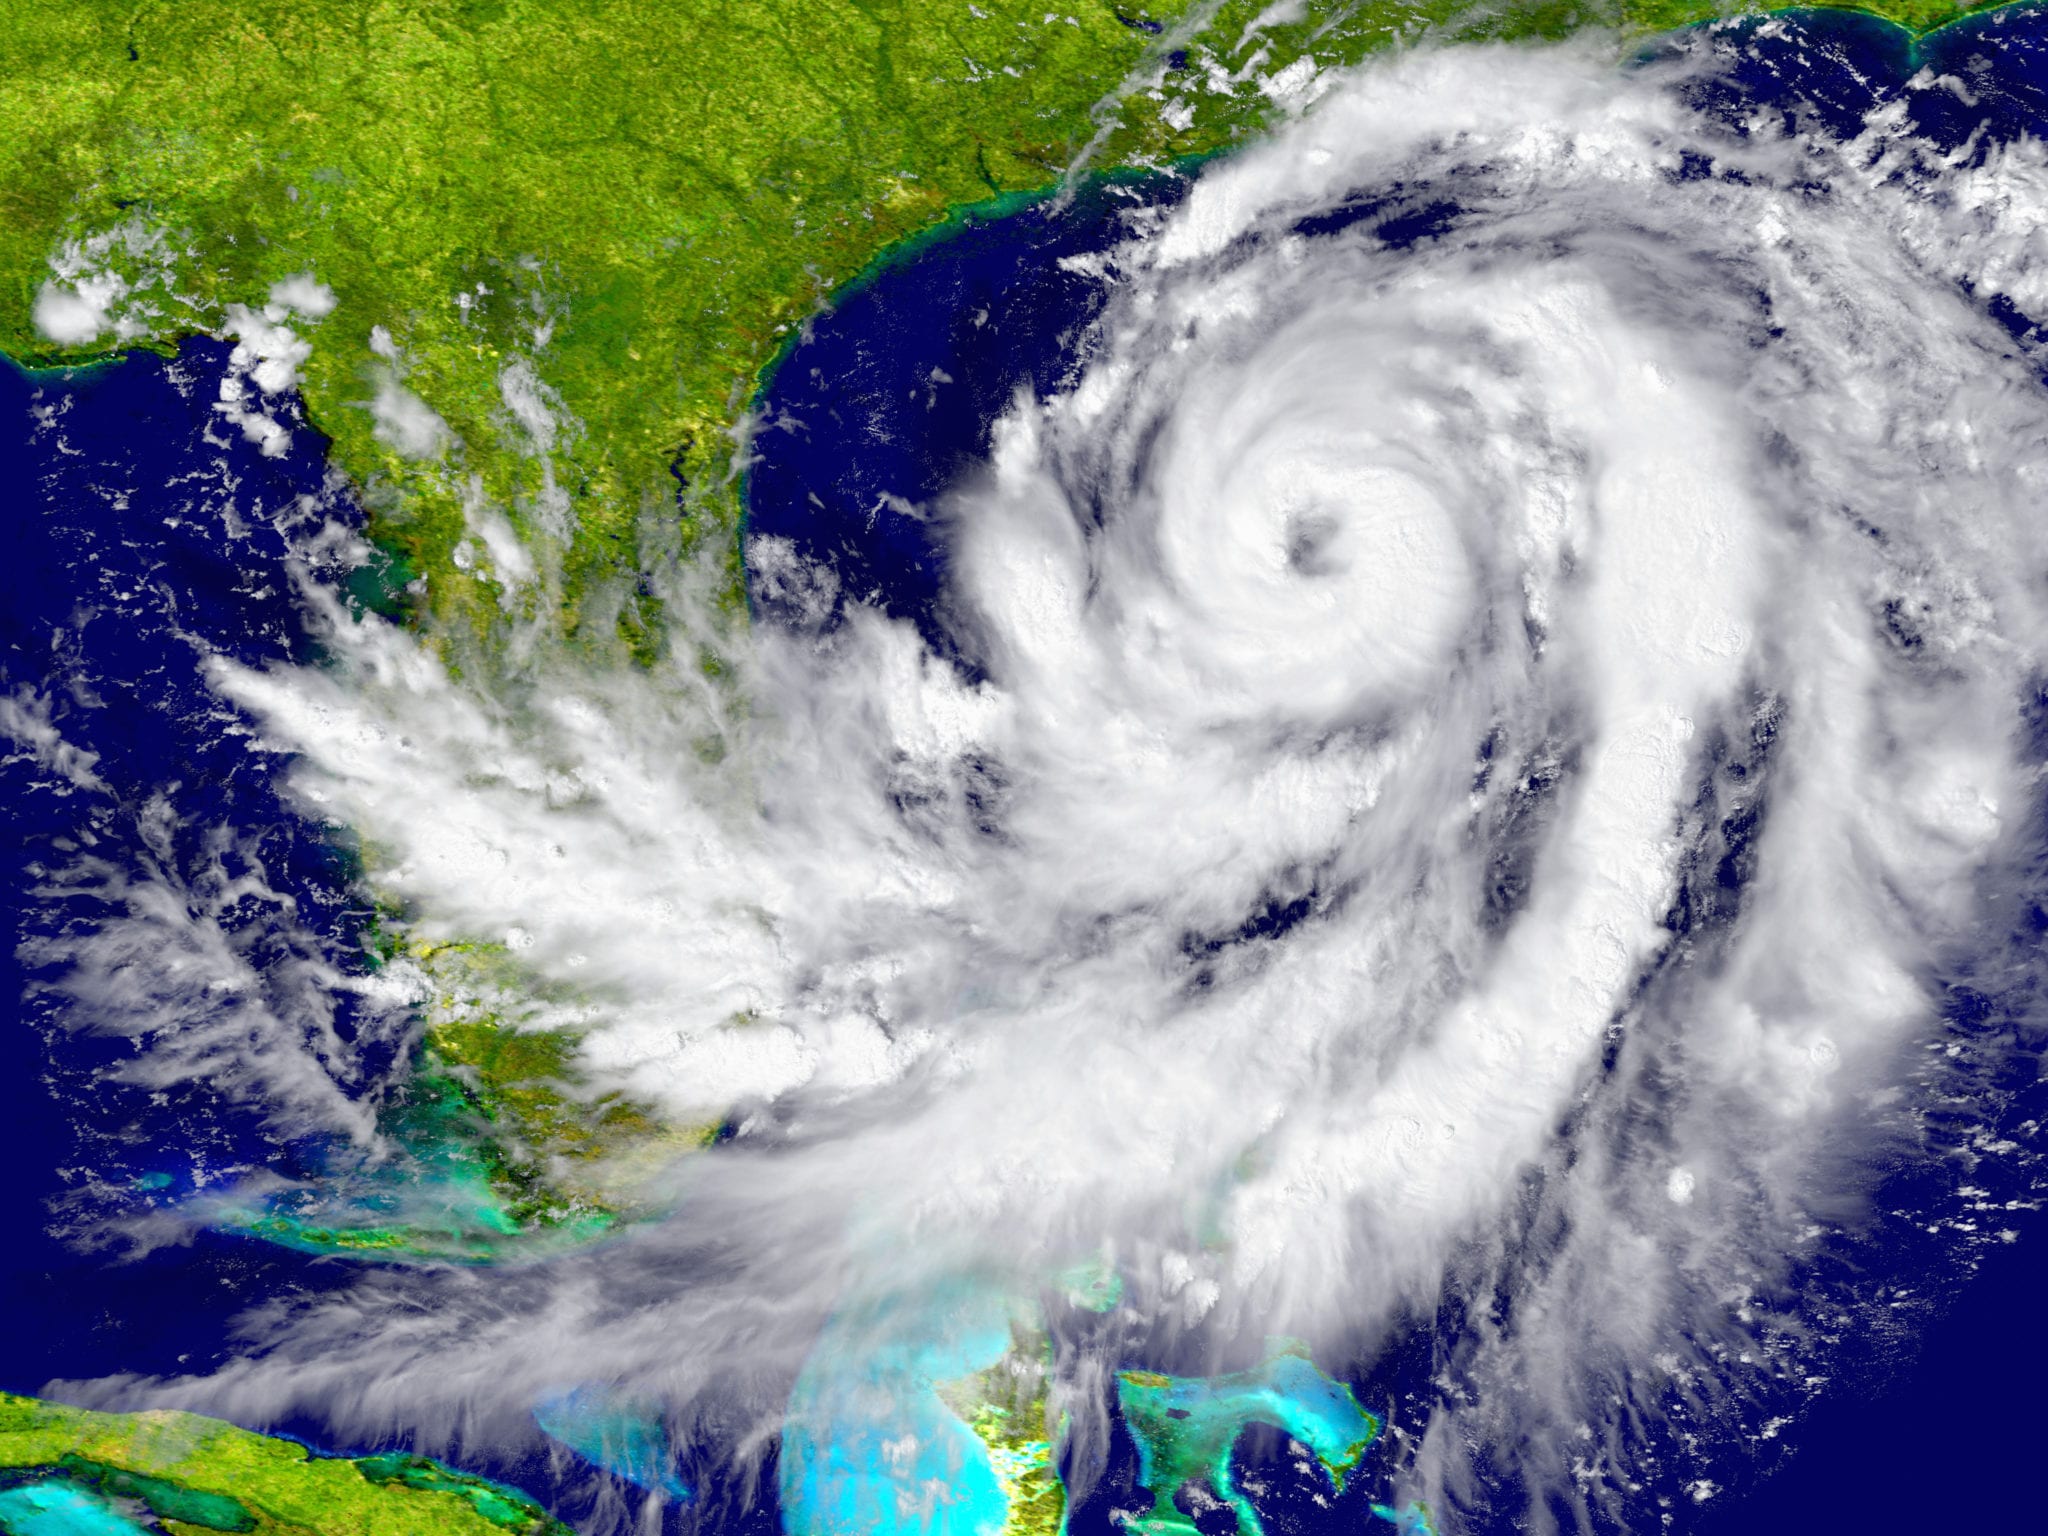 Floridians, Maybe Save That Stimulus? 14 Tropical Storms Predicted!